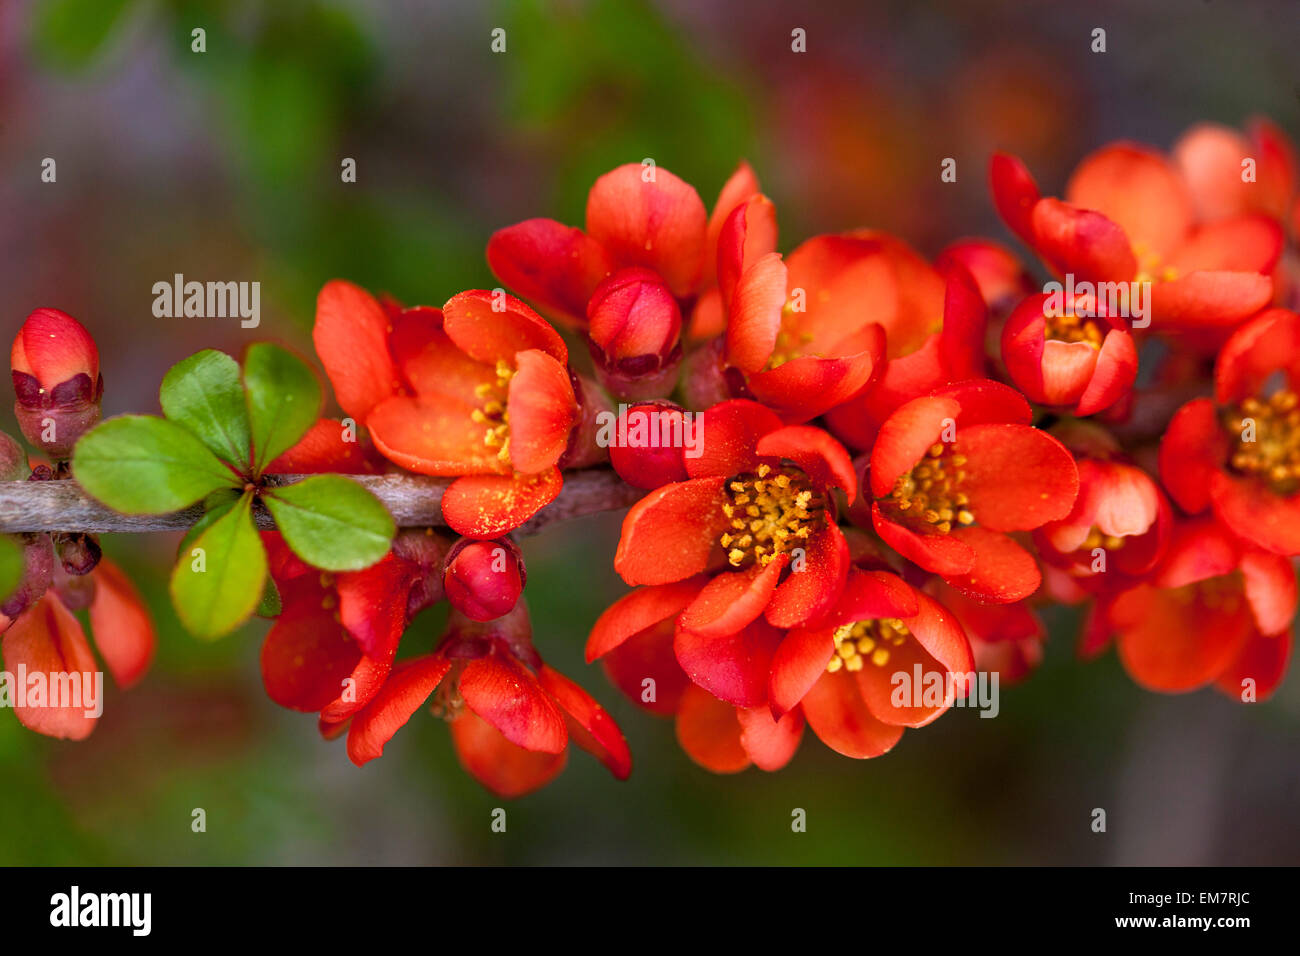 Flowering quince blossom flower Chaenomeles japonica Sargentii on a branch Stock Photo